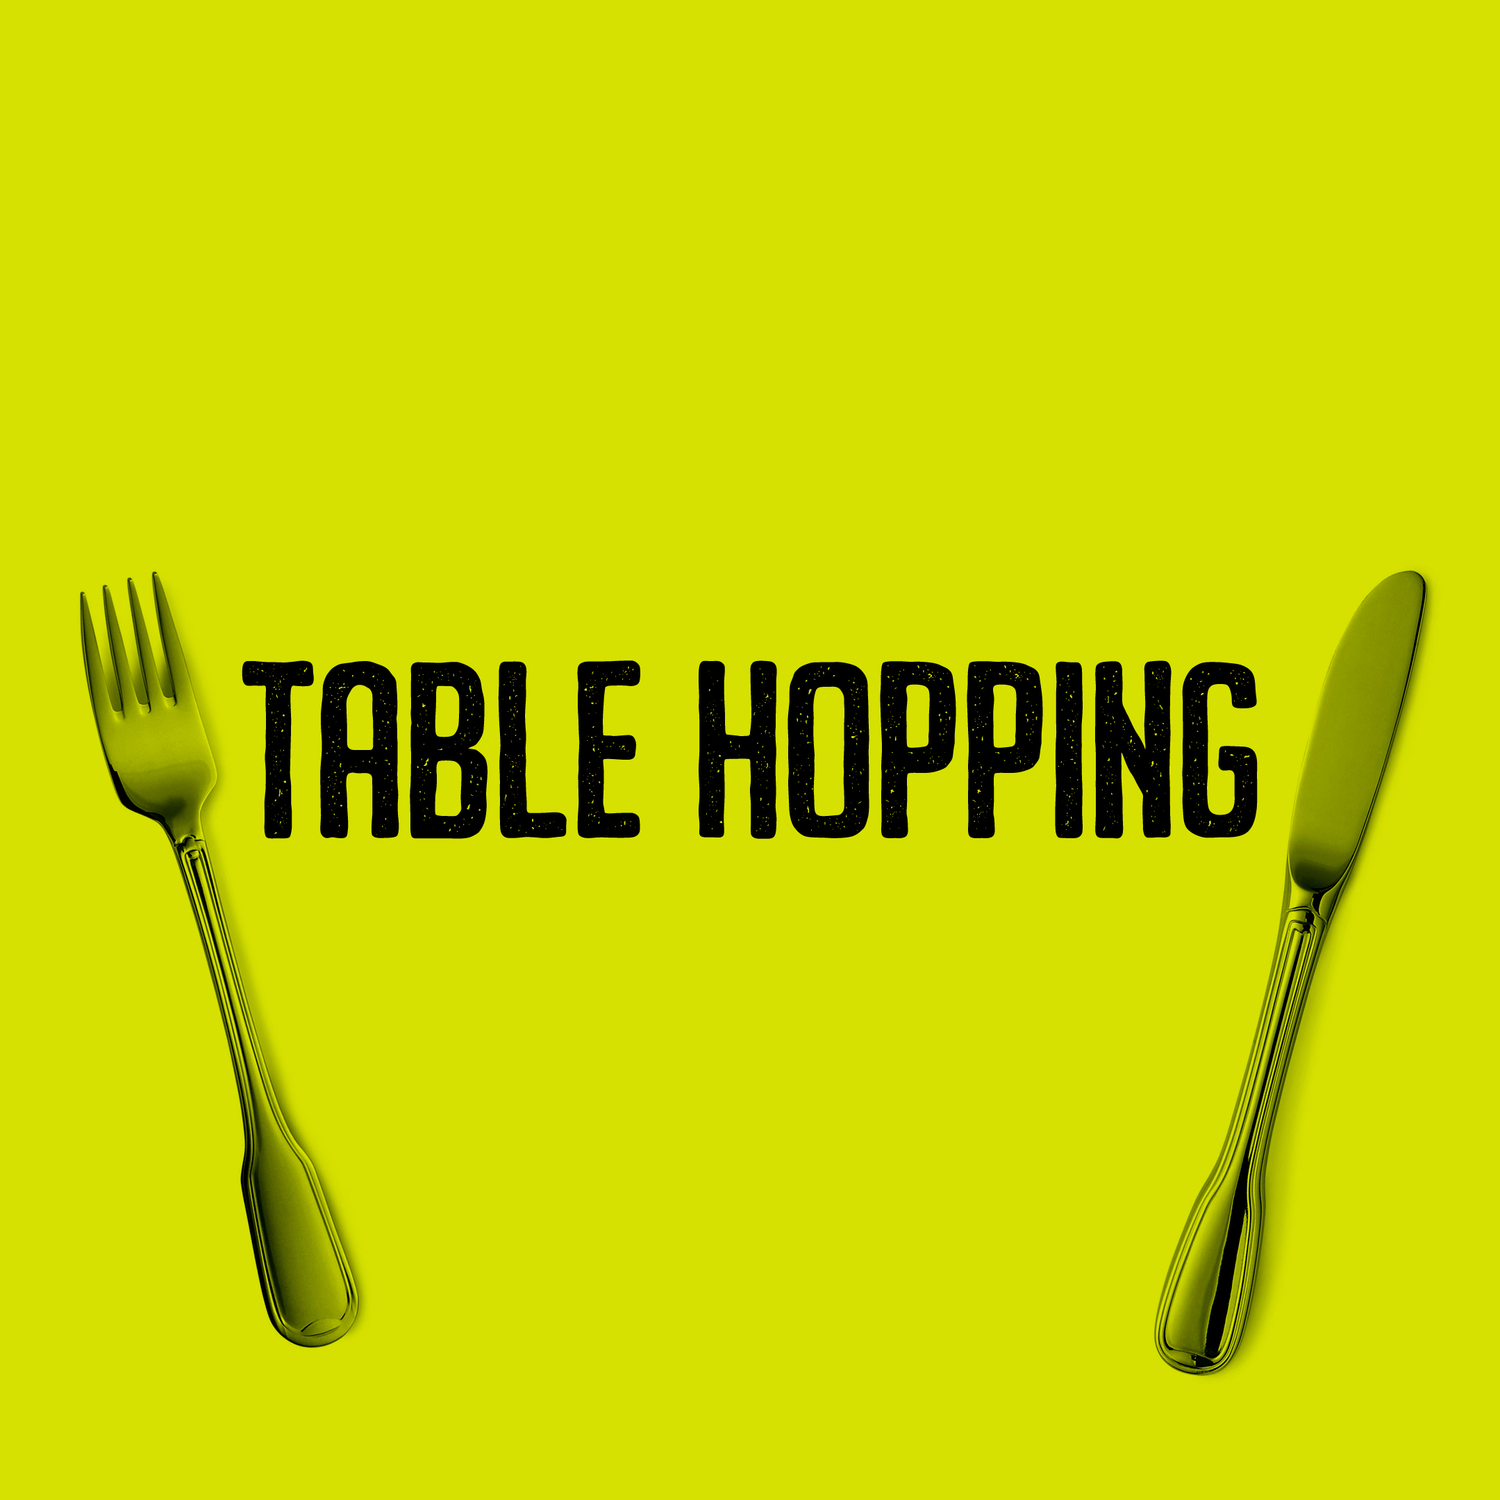 Table Hopping